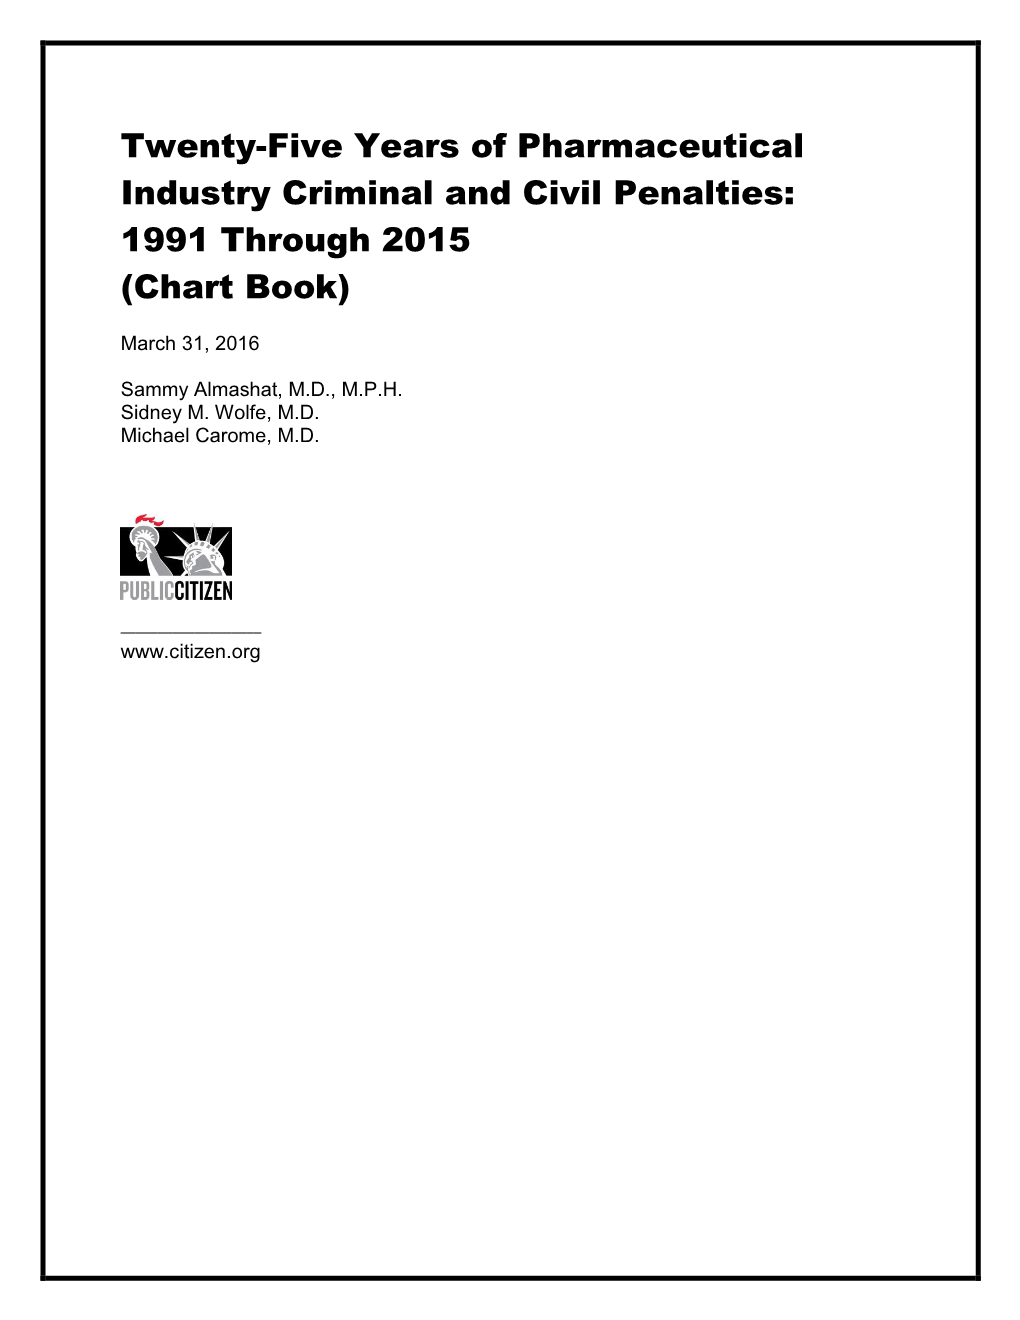 Twenty-Five Years of Pharmaceutical Industry Criminal and Civil Penalties: 1991 Through 2015 (Chart Book)